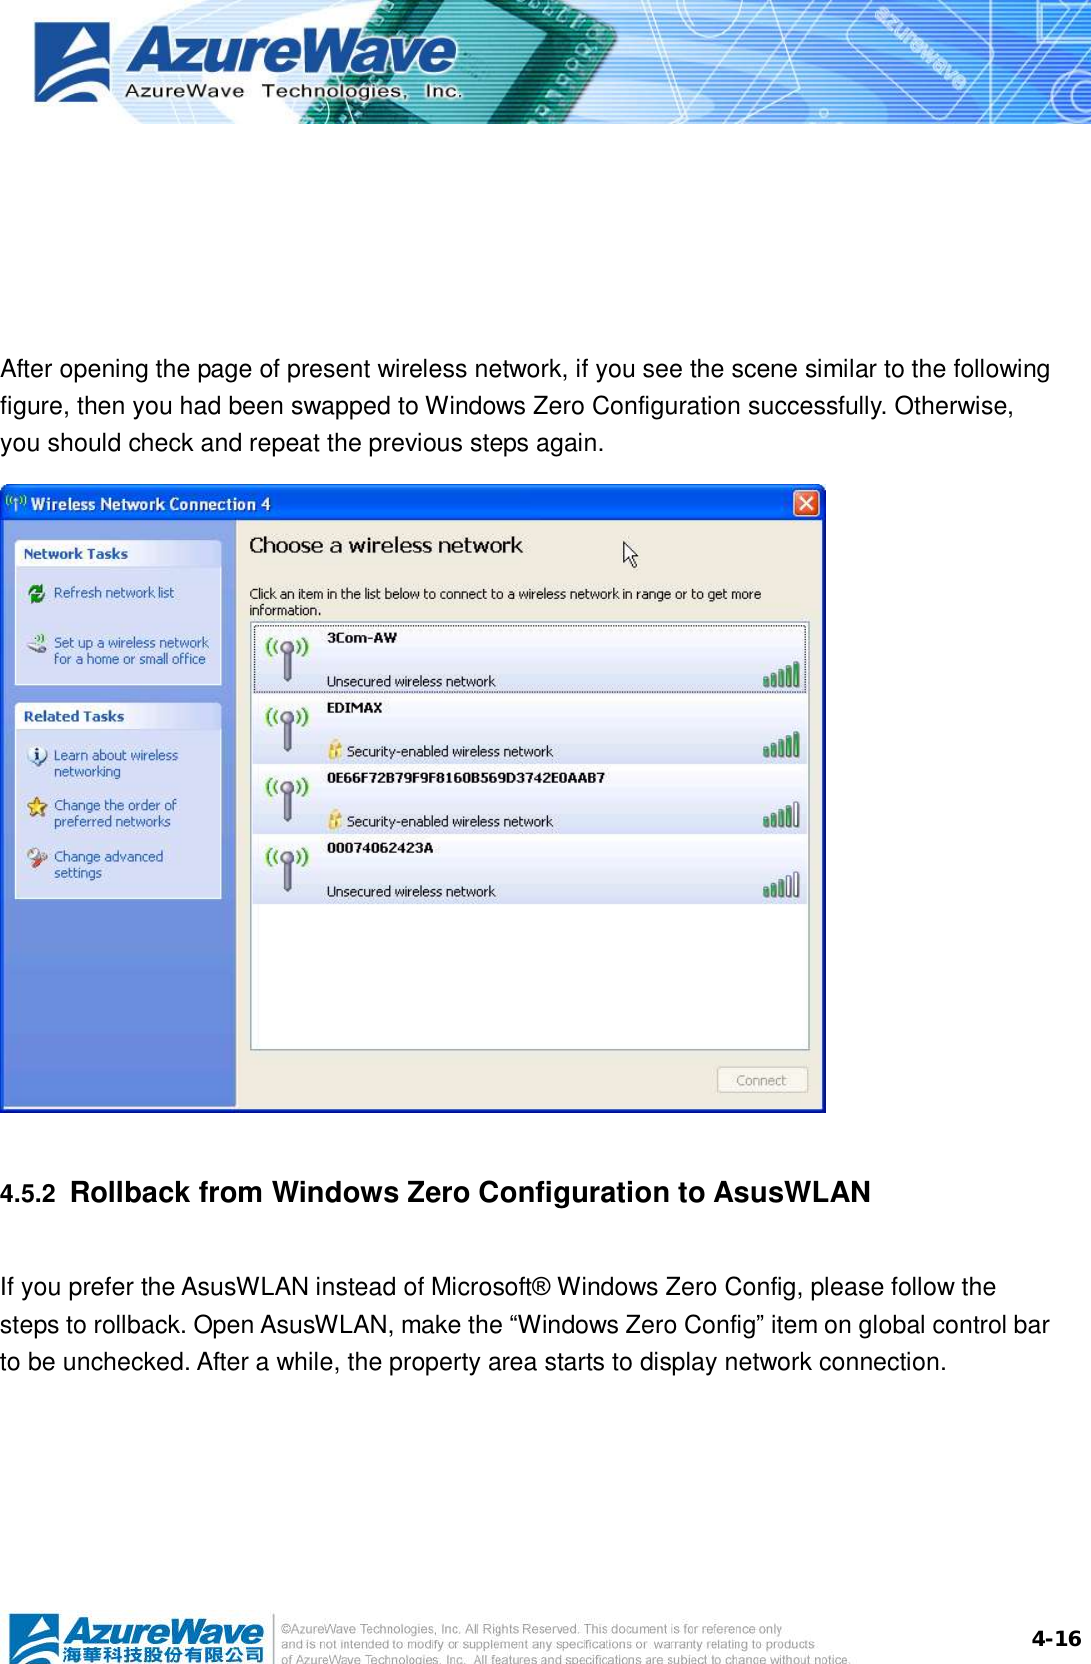  4-16    After opening the page of present wireless network, if you see the scene similar to the following figure, then you had been swapped to Windows Zero Configuration successfully. Otherwise, you should check and repeat the previous steps again.  4.5.2  Rollback from Windows Zero Configuration to AsusWLAN If you prefer the AsusWLAN instead of Microsoft® Windows Zero Config, please follow the steps to rollback. Open AsusWLAN, make the “Windows Zero Config” item on global control bar to be unchecked. After a while, the property area starts to display network connection.  